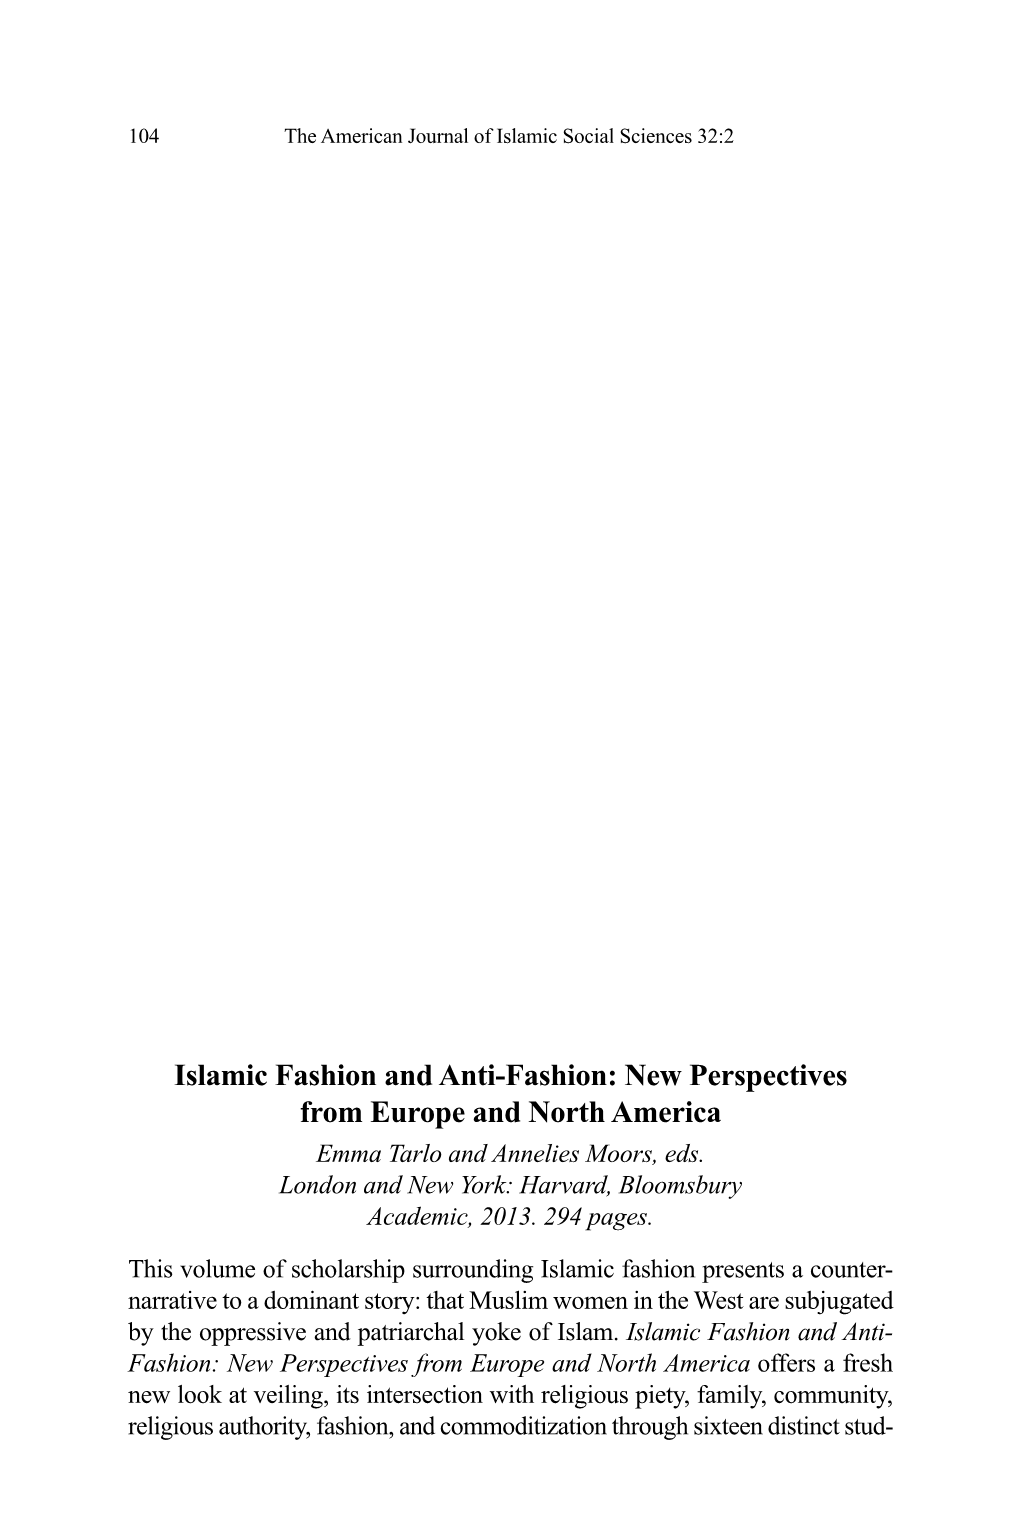 Islamic Fashion and Anti-Fashion: New Perspectives from Europe and North America Emma Tarlo and Annelies Moors, Eds